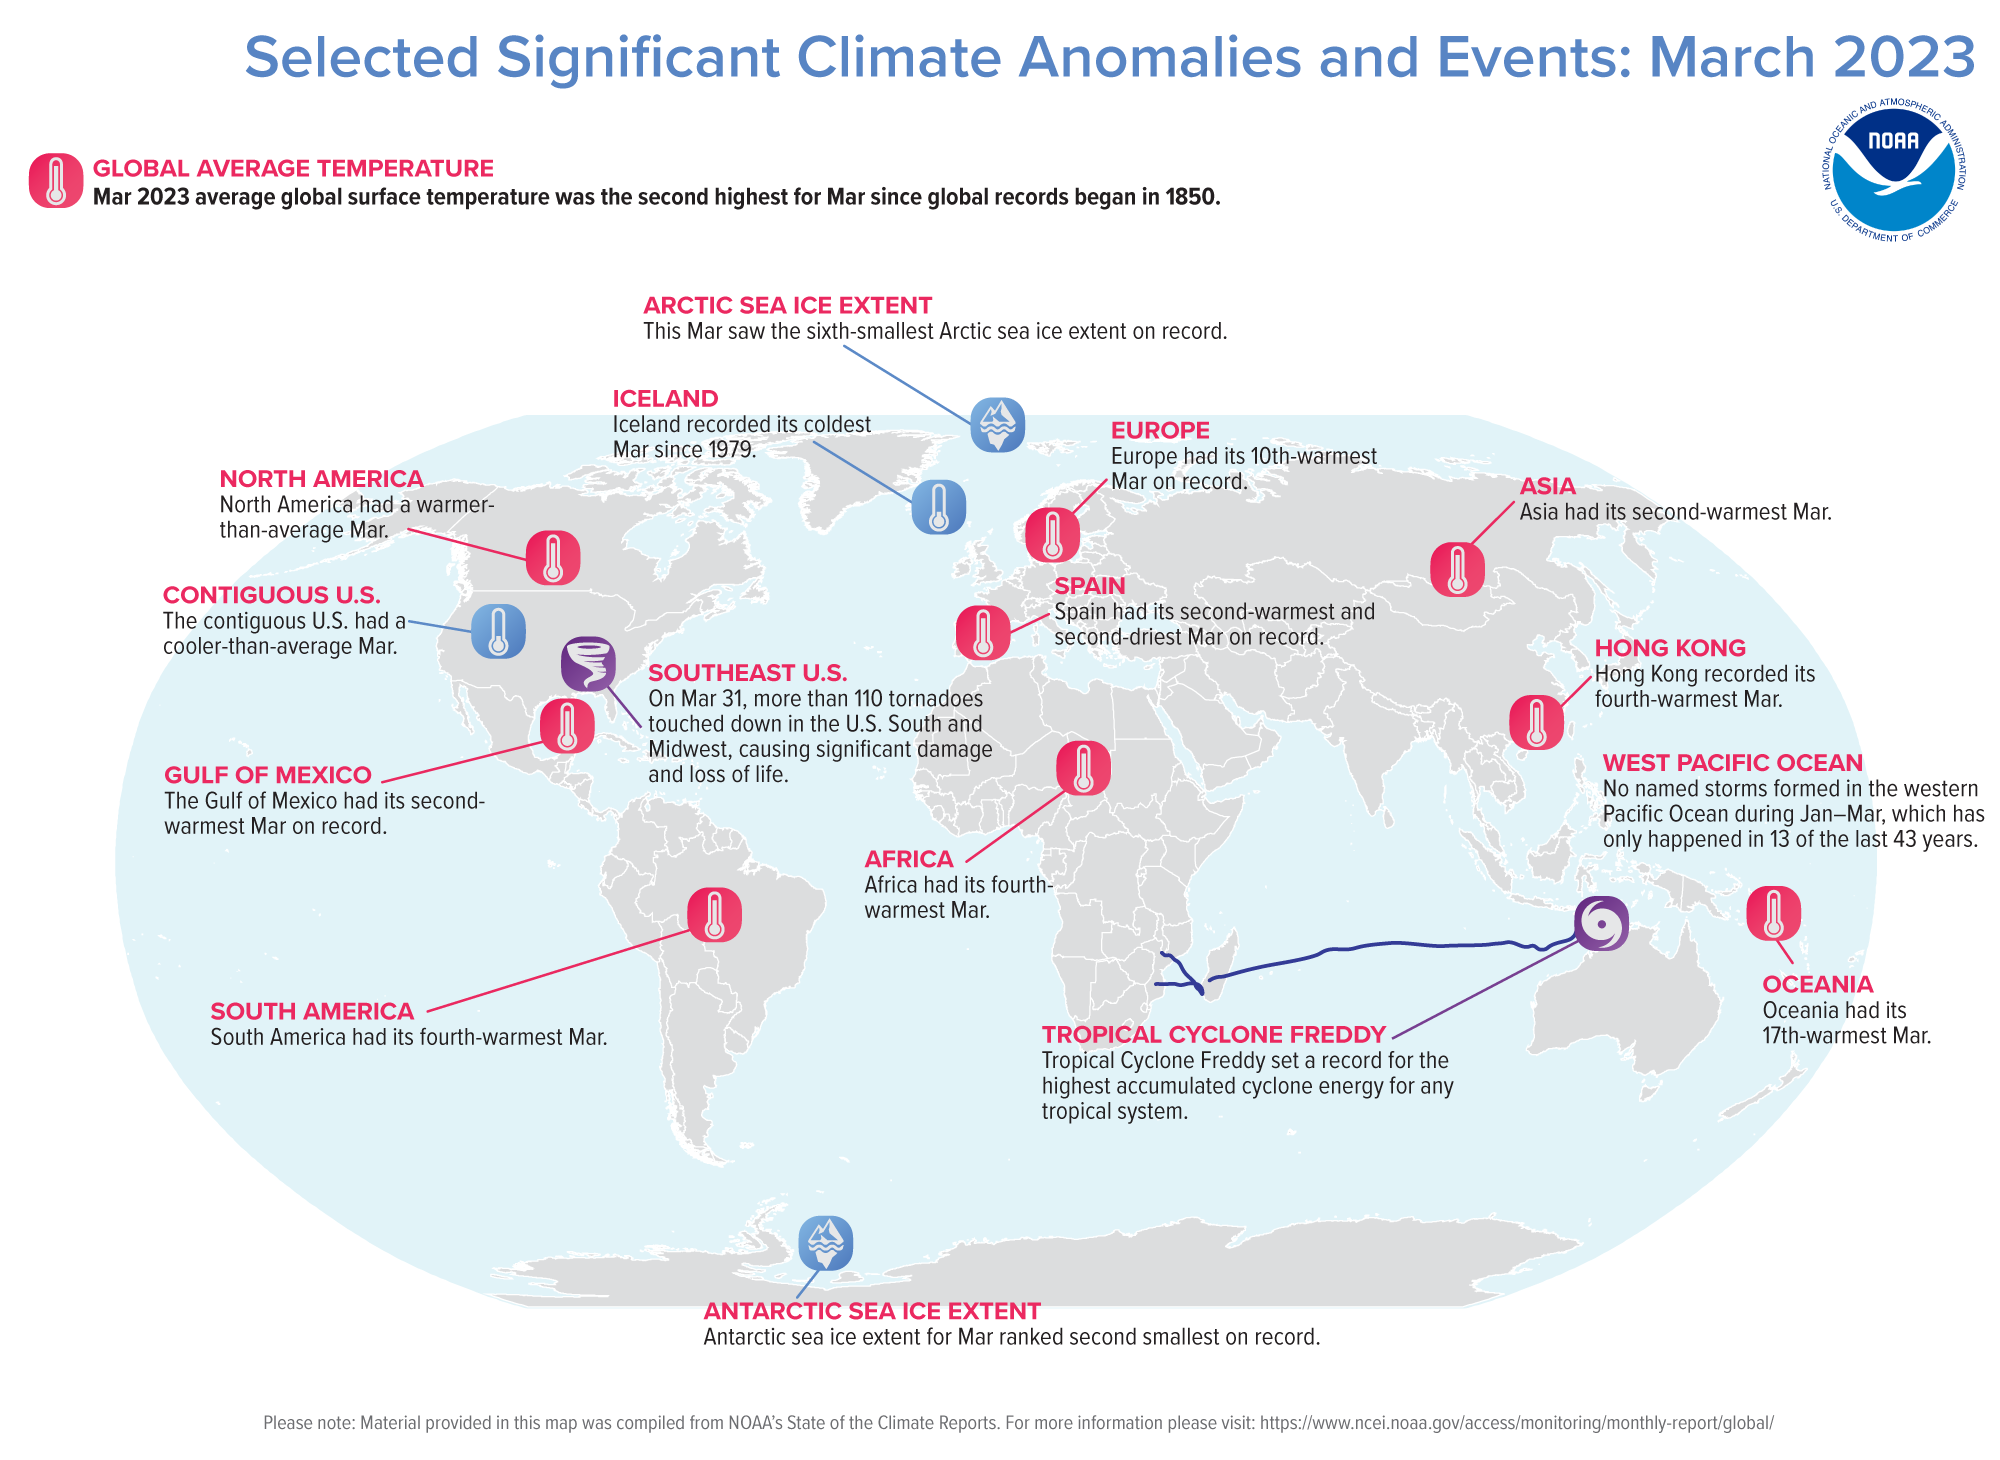 A map of the world plotted with some of the most significant climate events that occurred during March 2023.